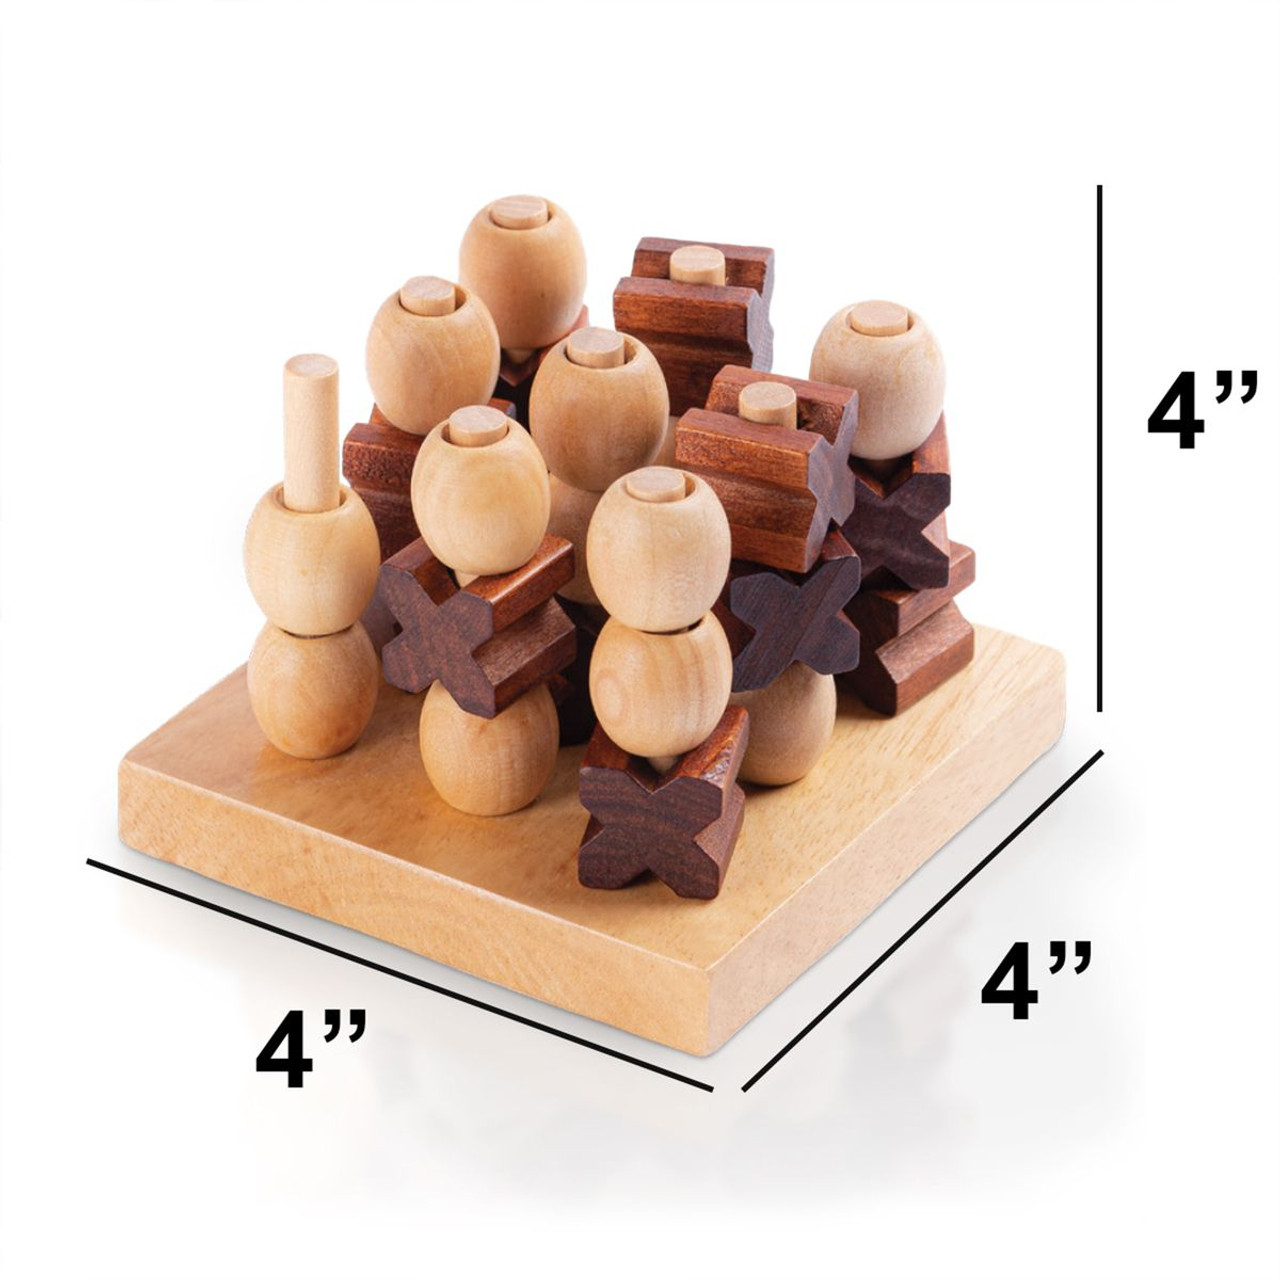 Hand-Crafted Wooden 3D Mini Tic-Tac-Toe Game product image